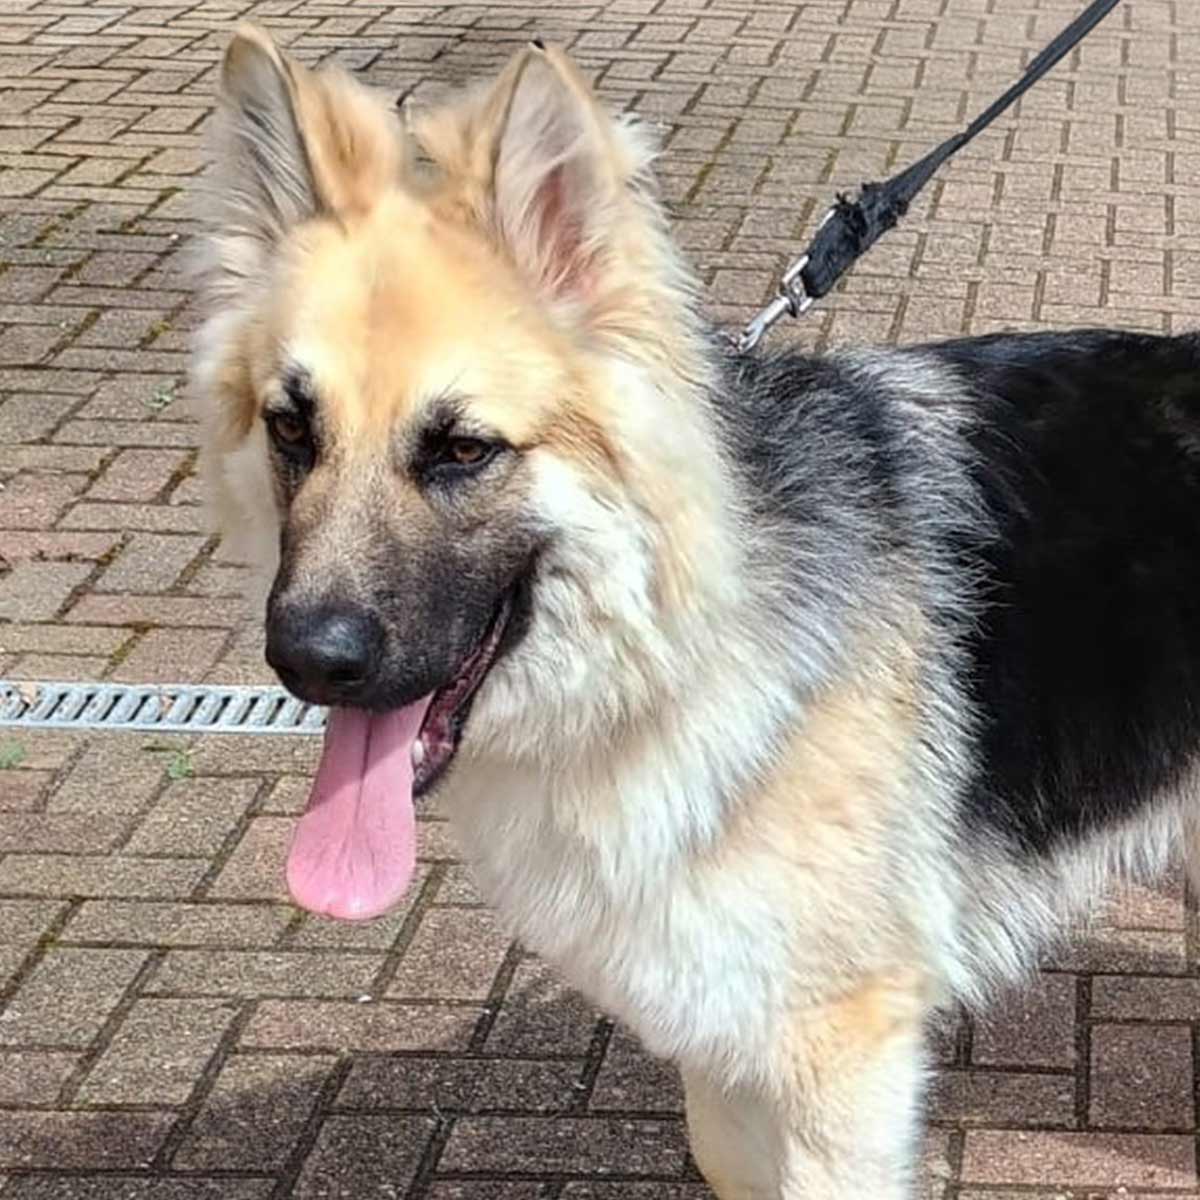 How about a bit of good news on a Friday? This boy has just gone to a loving new home – wish him luck! #RescueDogs #GermanShepherd